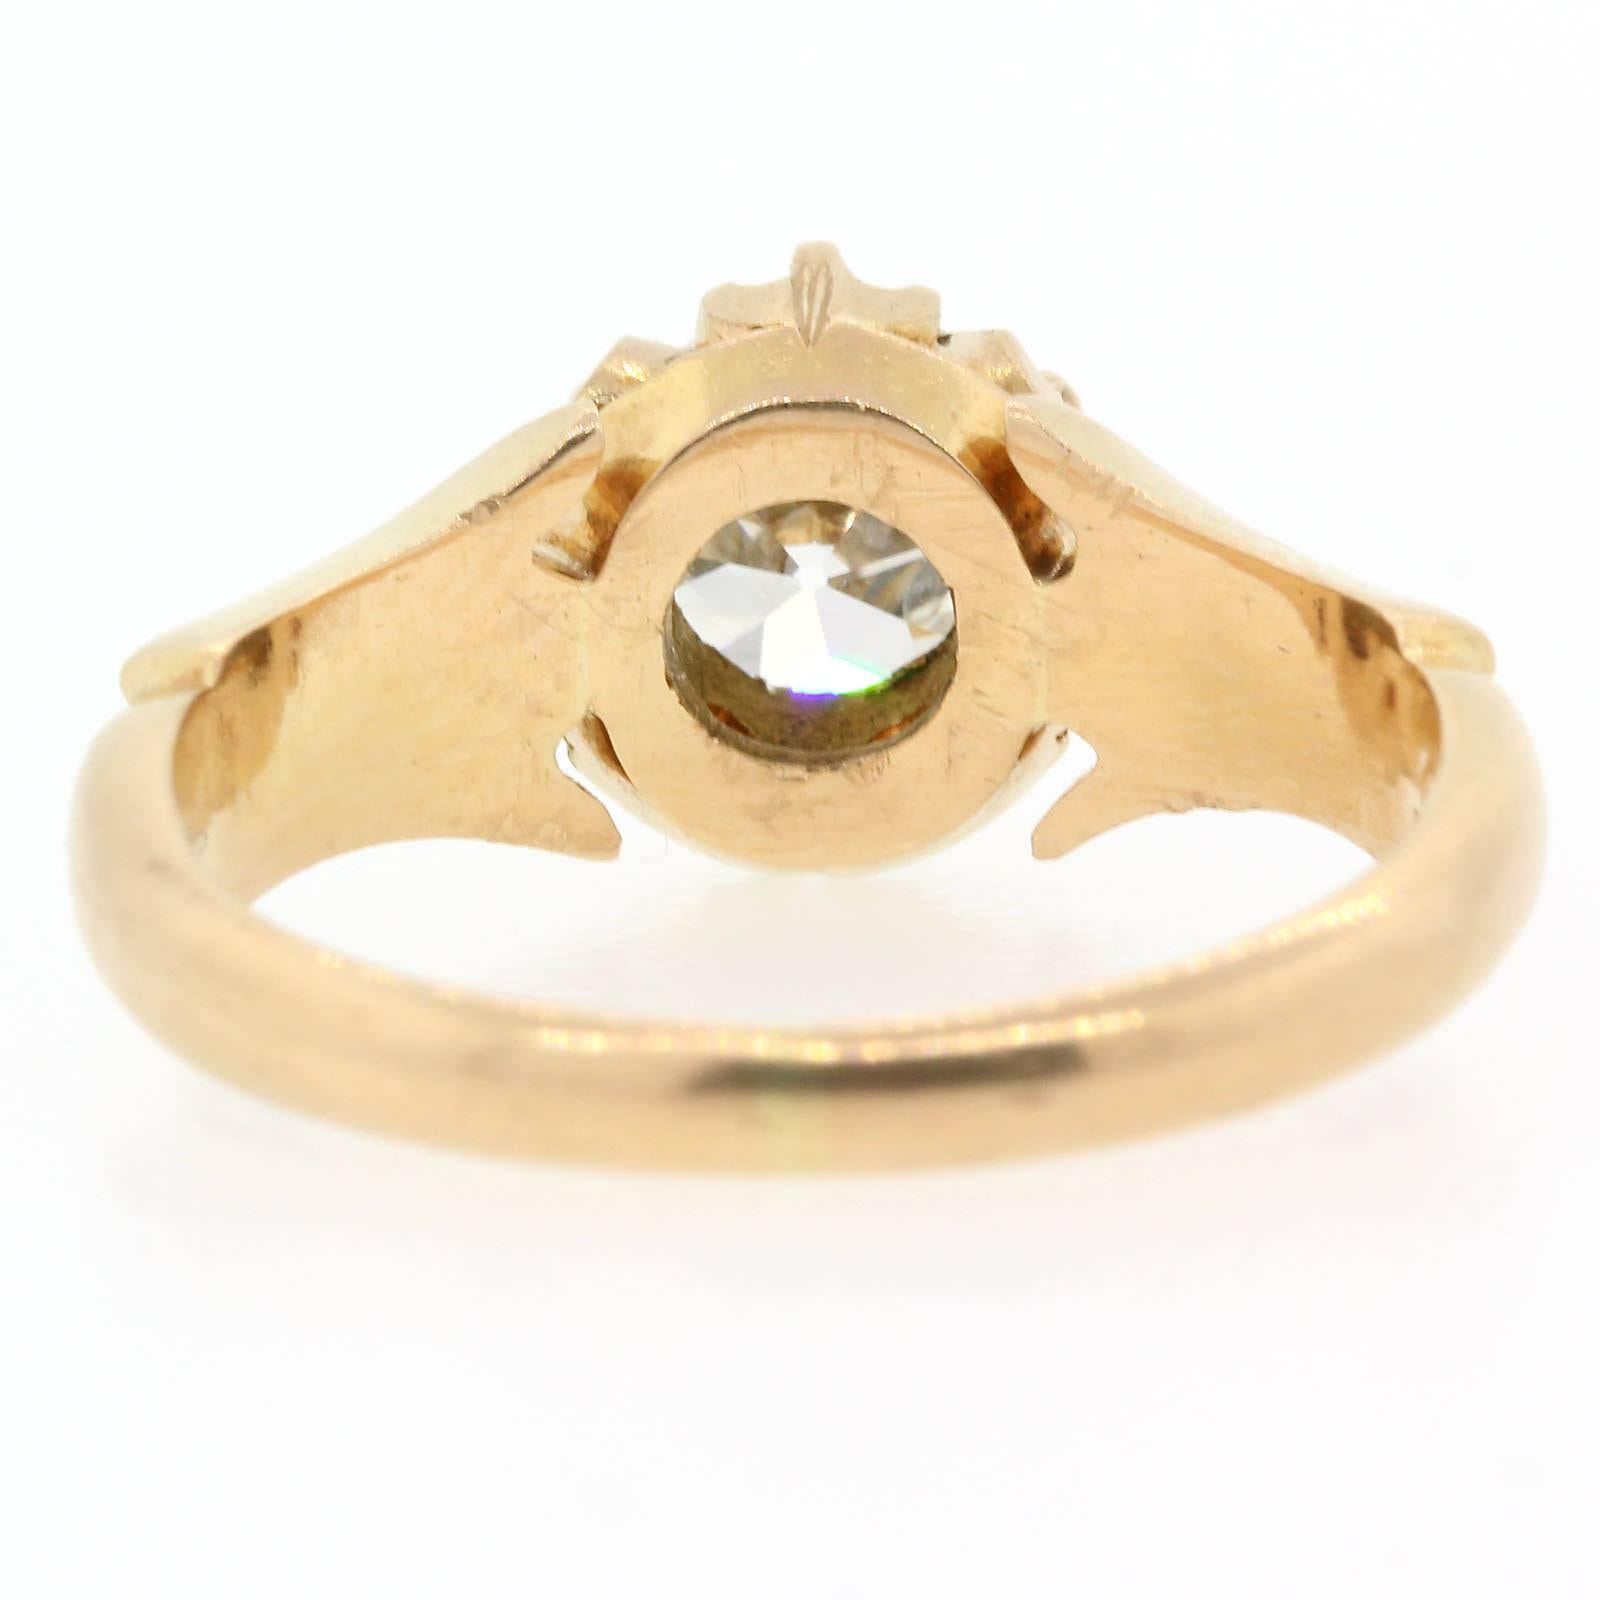 0.94 Carat Old Cut Diamond Victorian Gold Ring In Excellent Condition For Sale In Beverly Hills, CA